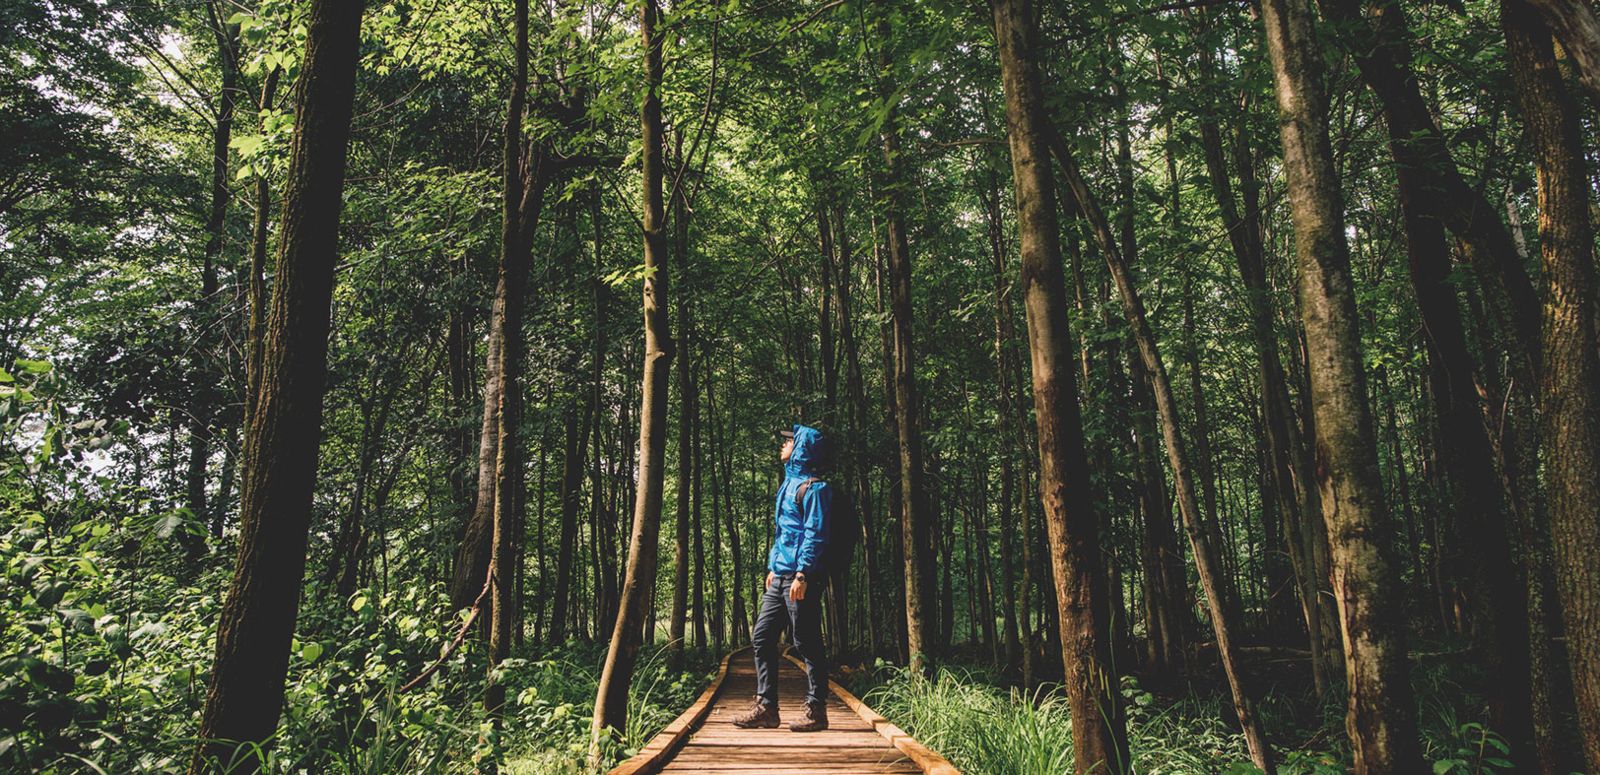 a person in the woods walking on a board walk